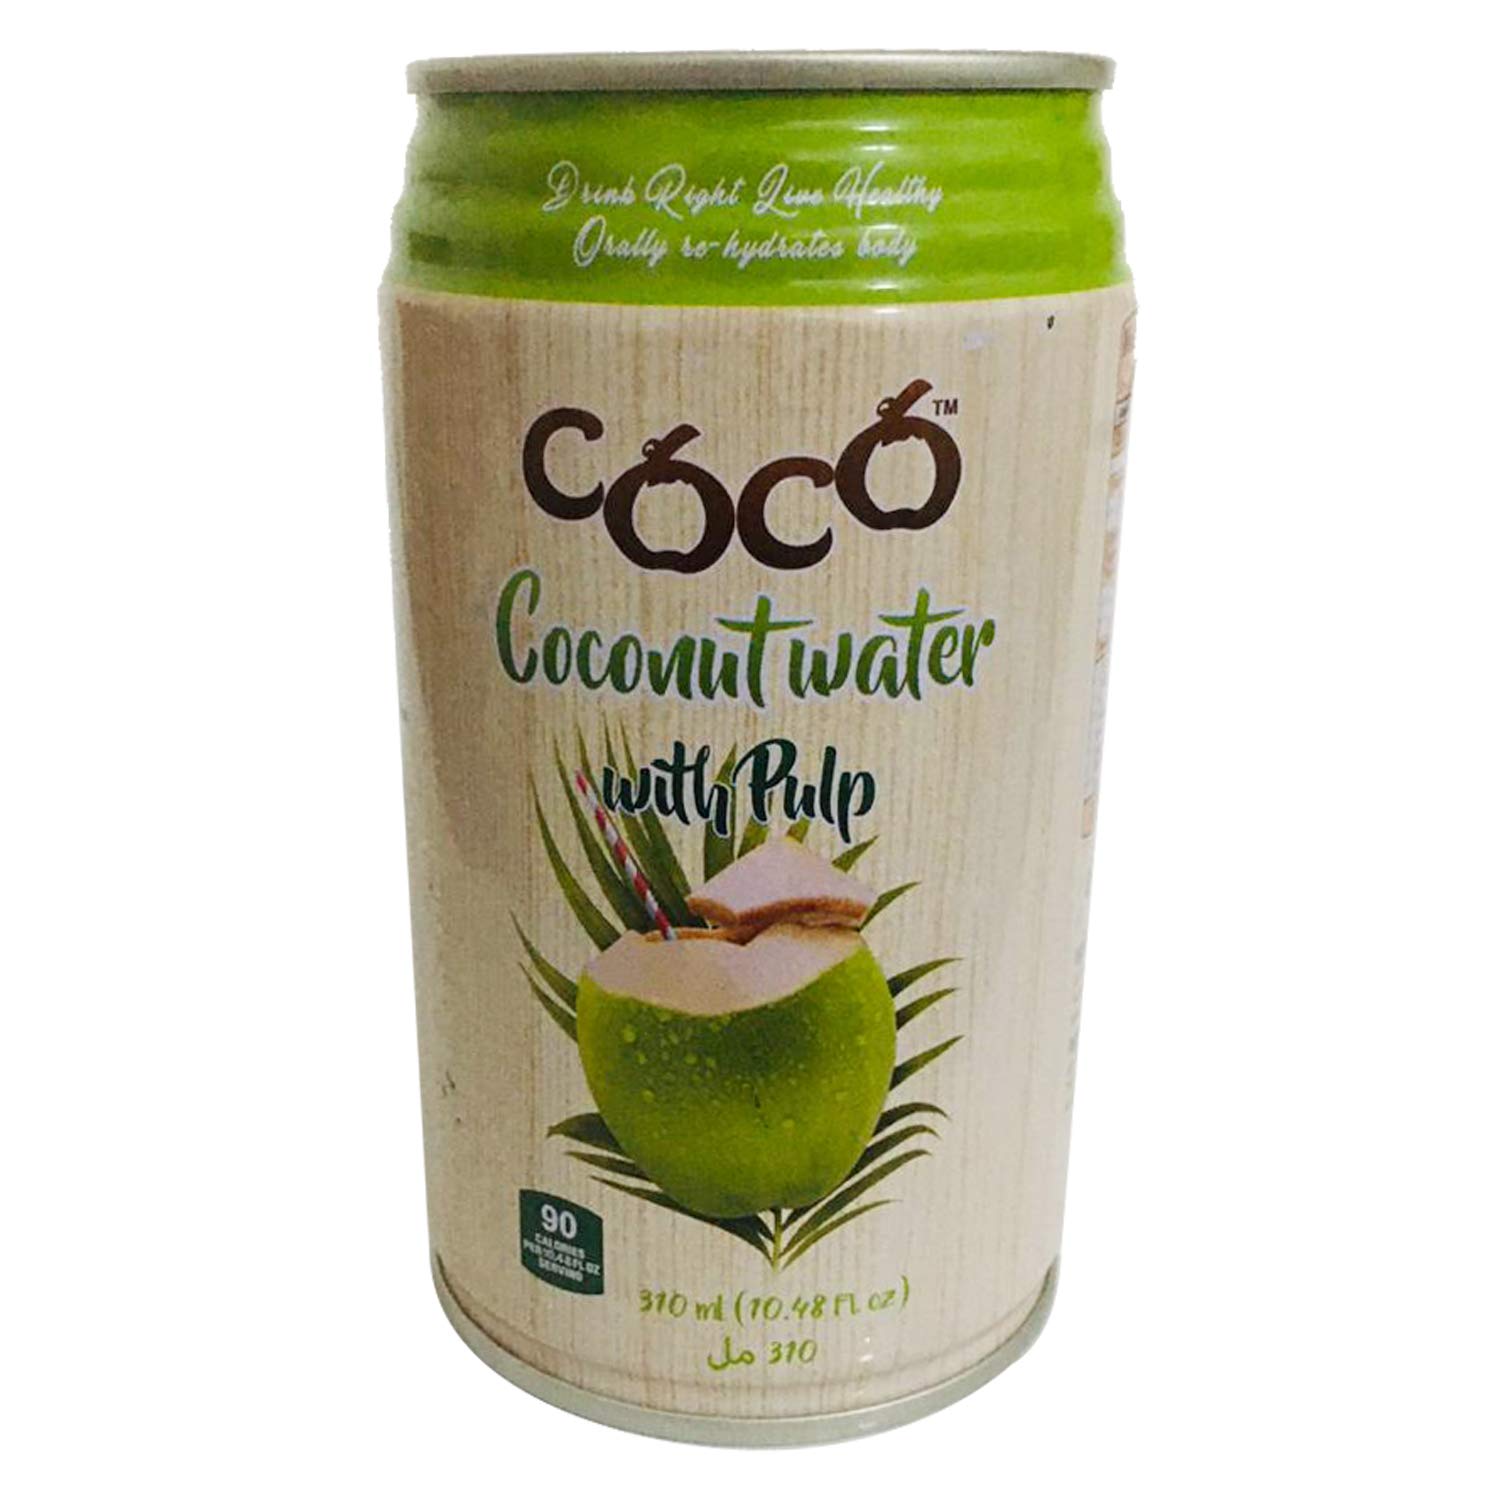 Does canned coconut water go bad